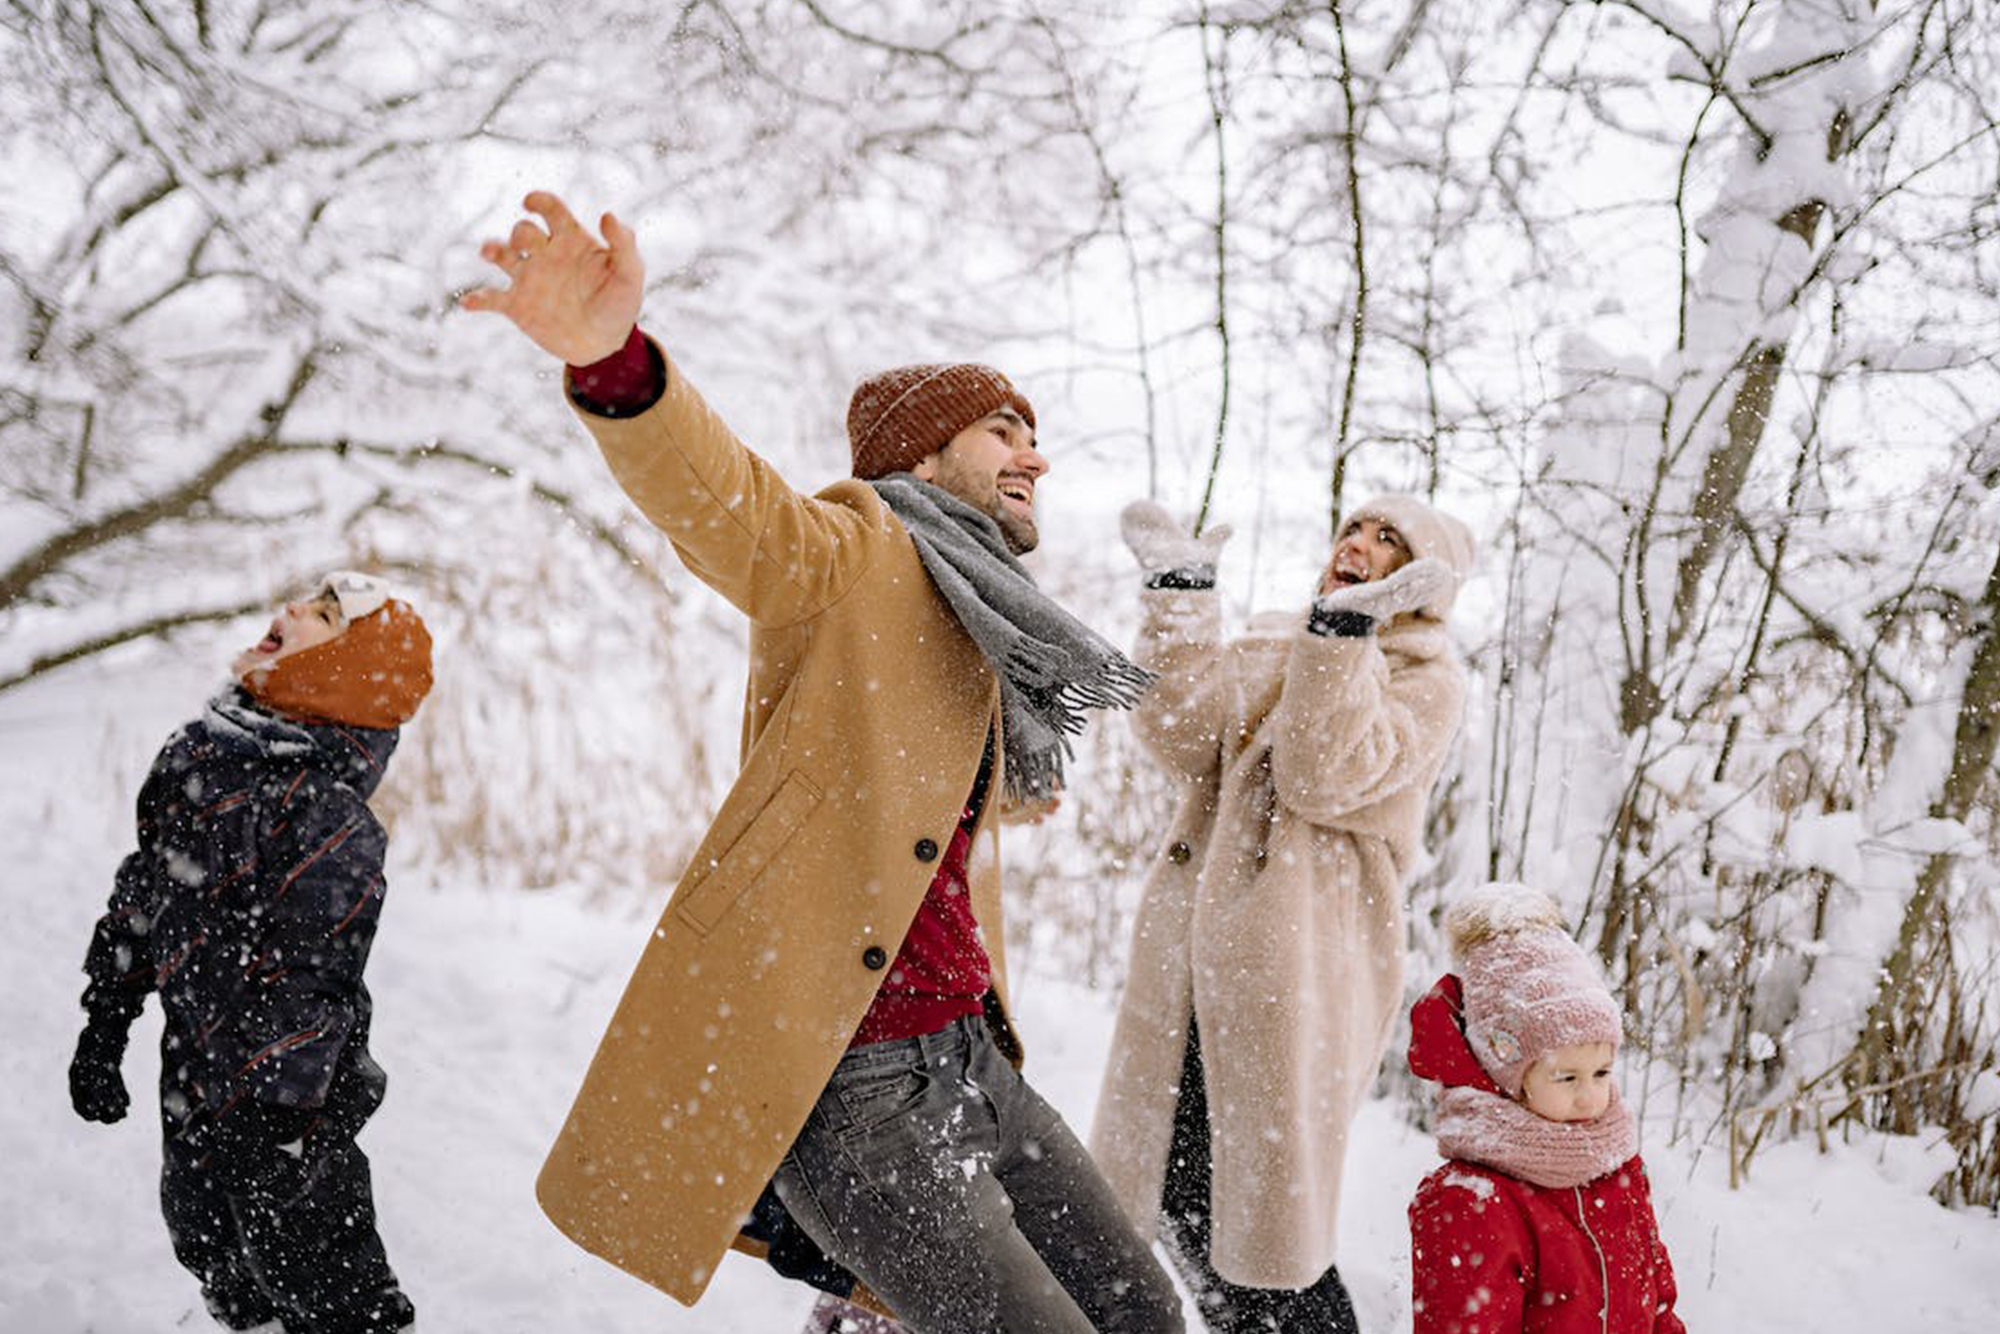 Make a winter bucket list and get outdoors to beat boredom